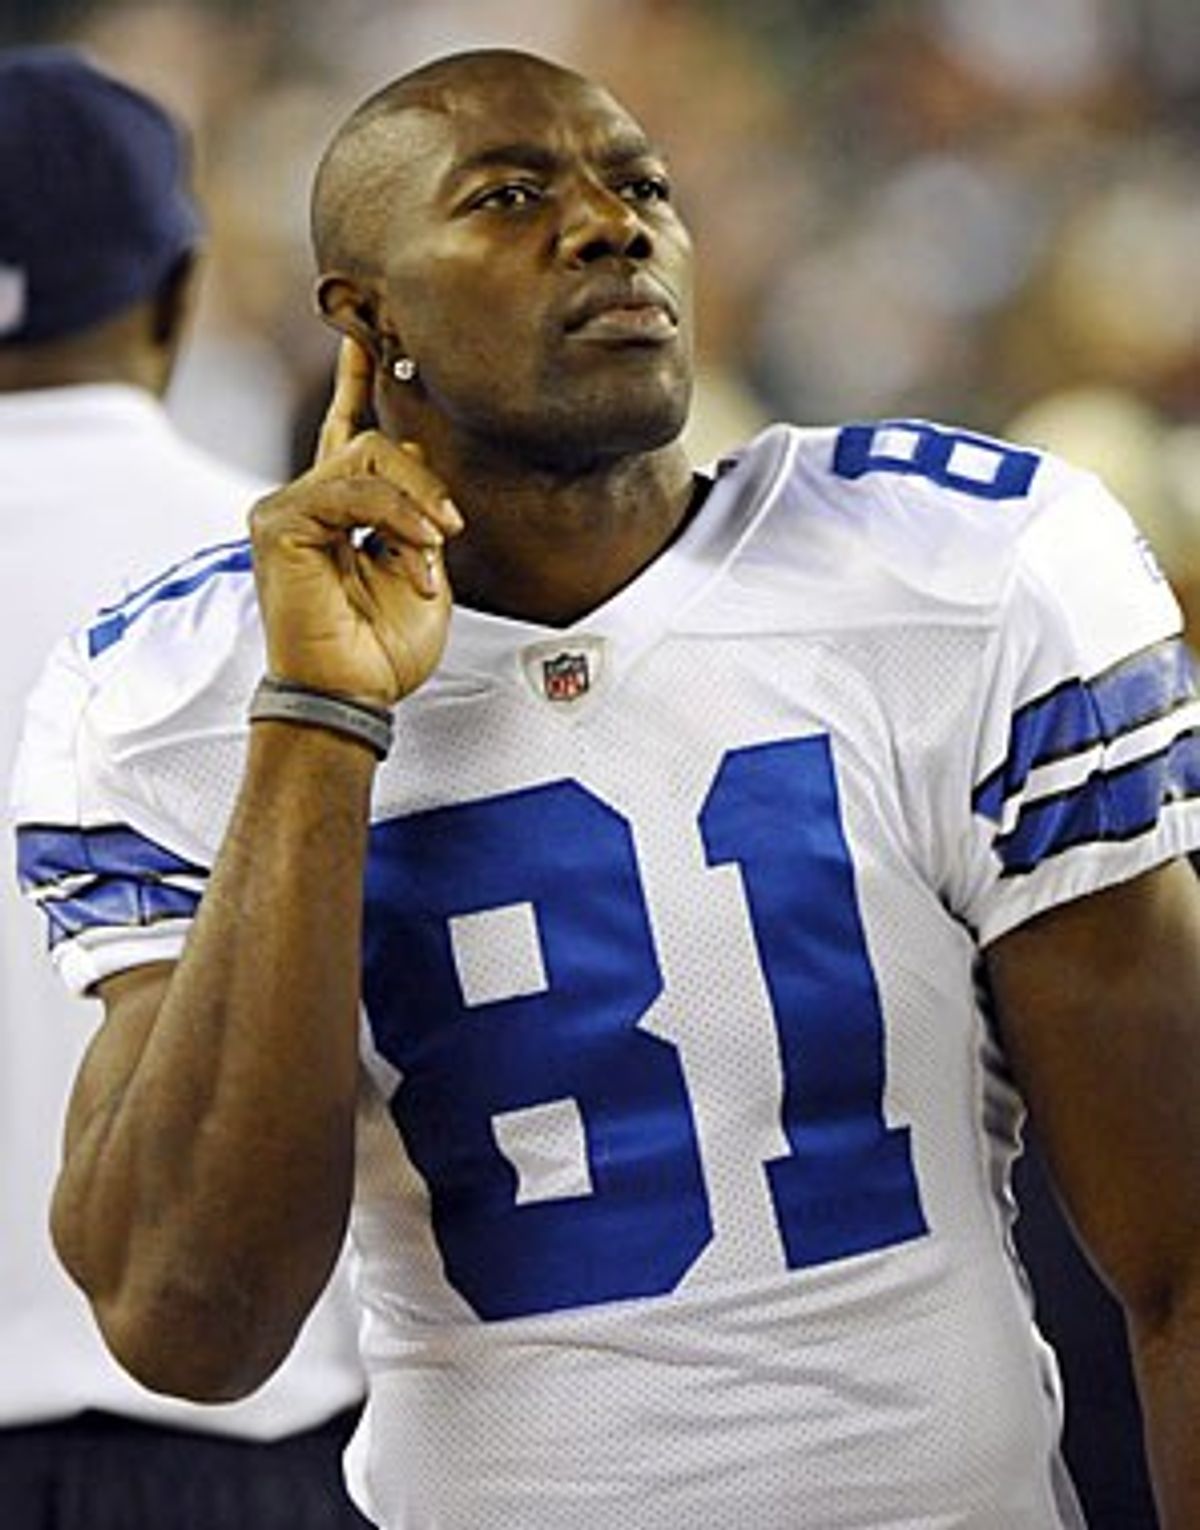 Does Terrell Owens Deserve To Be In The Hall Of Fame?